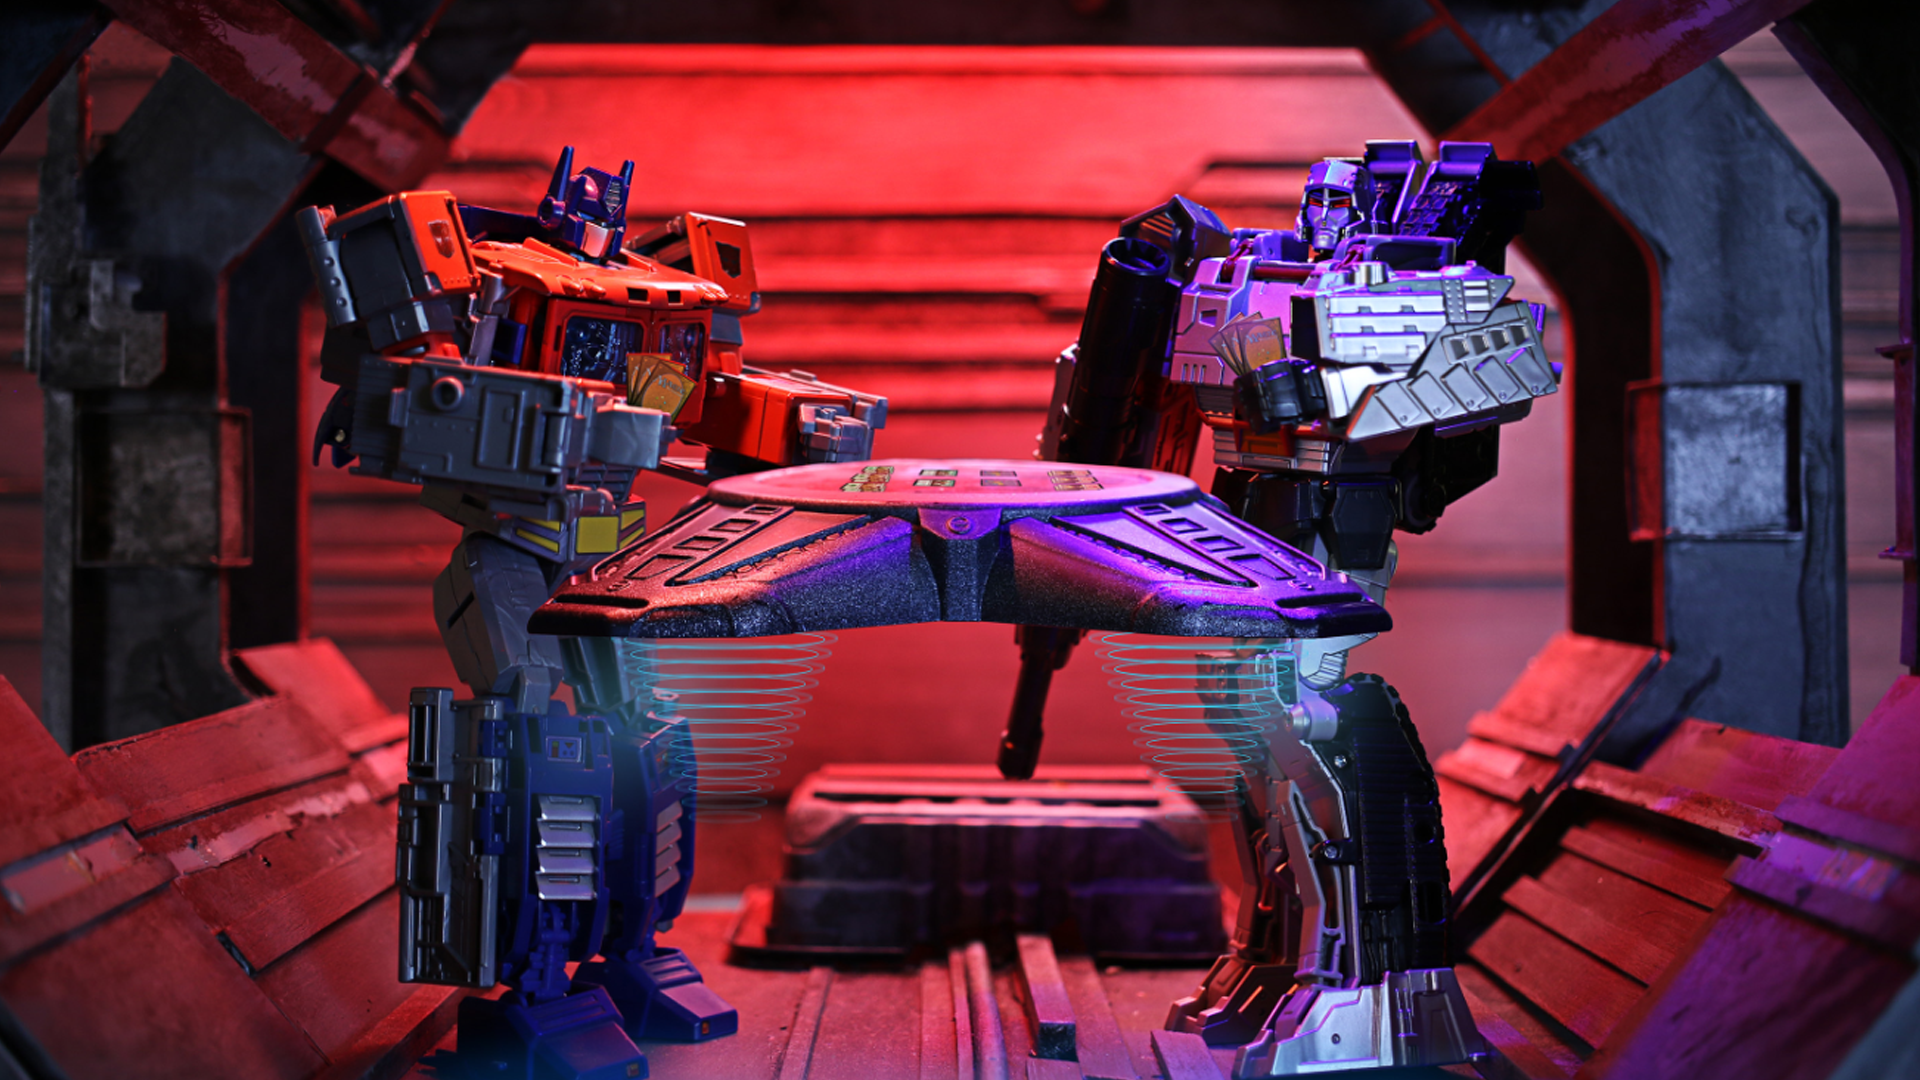 A promo image for Transformers cards